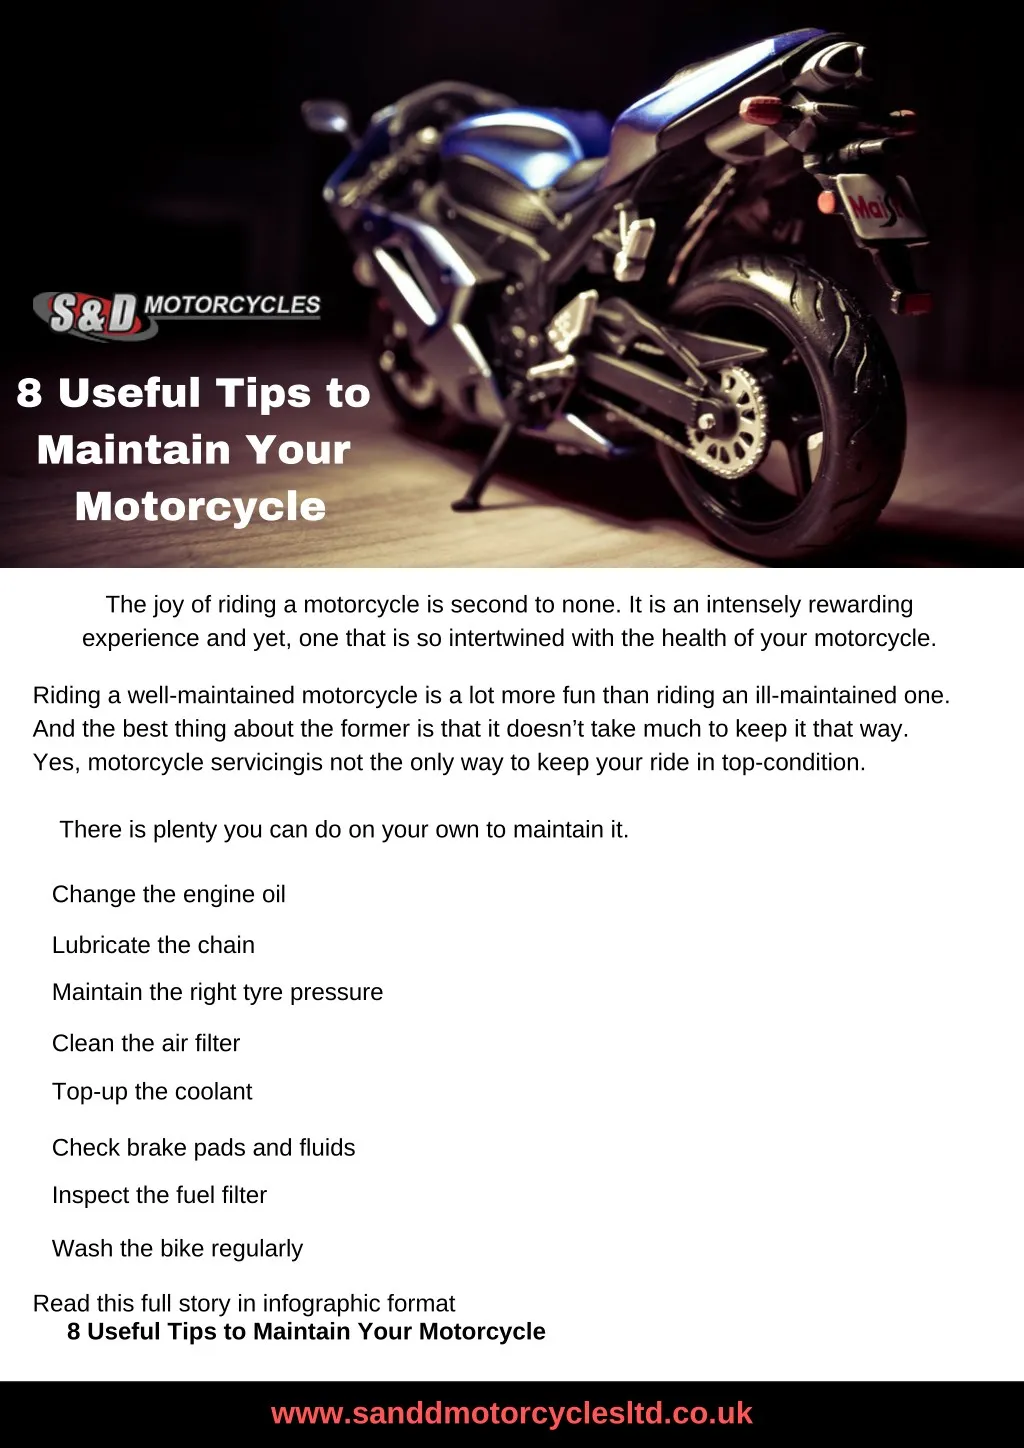 8 useful tips to maintain your motorcycle